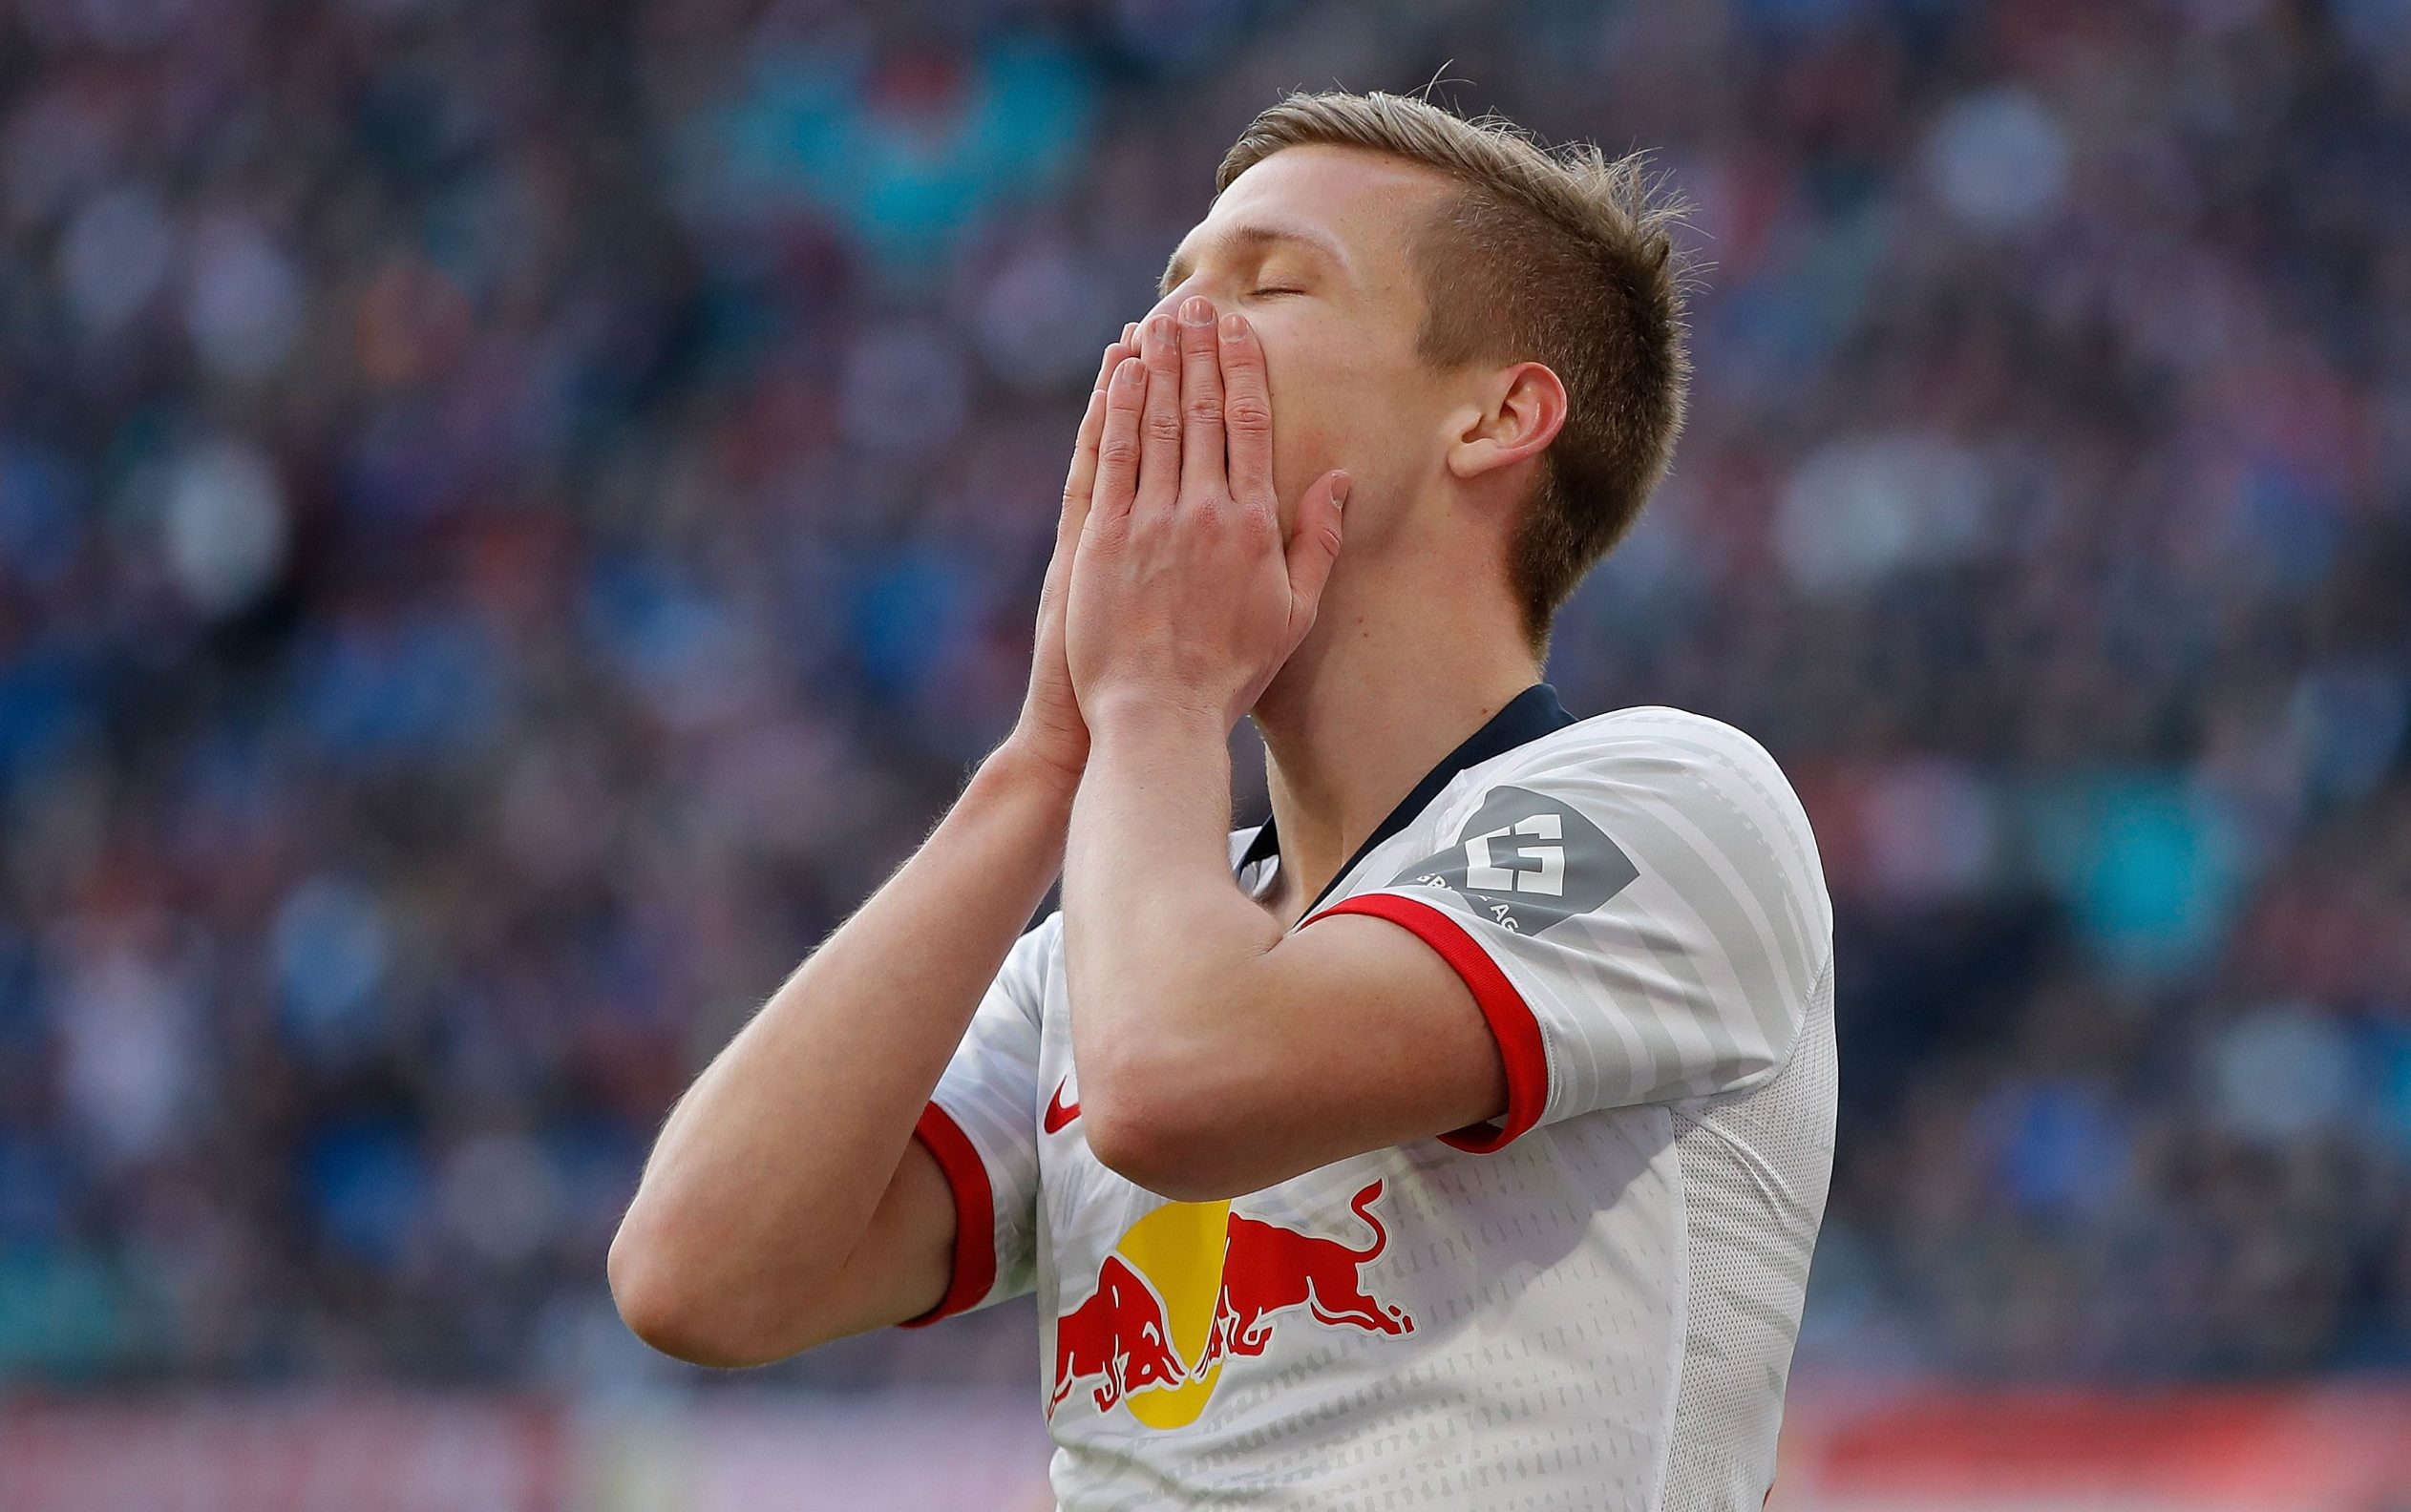 Leipzig's Spanish midfielder Dani Olmo reacts to a missed chance on goal during the German first division Bundesliga football match RB Leipzig vs SV Werder Bremen, in Leipzig, eastern Germany on February 15, 2020. (Photo by Odd ANDERSEN / AFP)